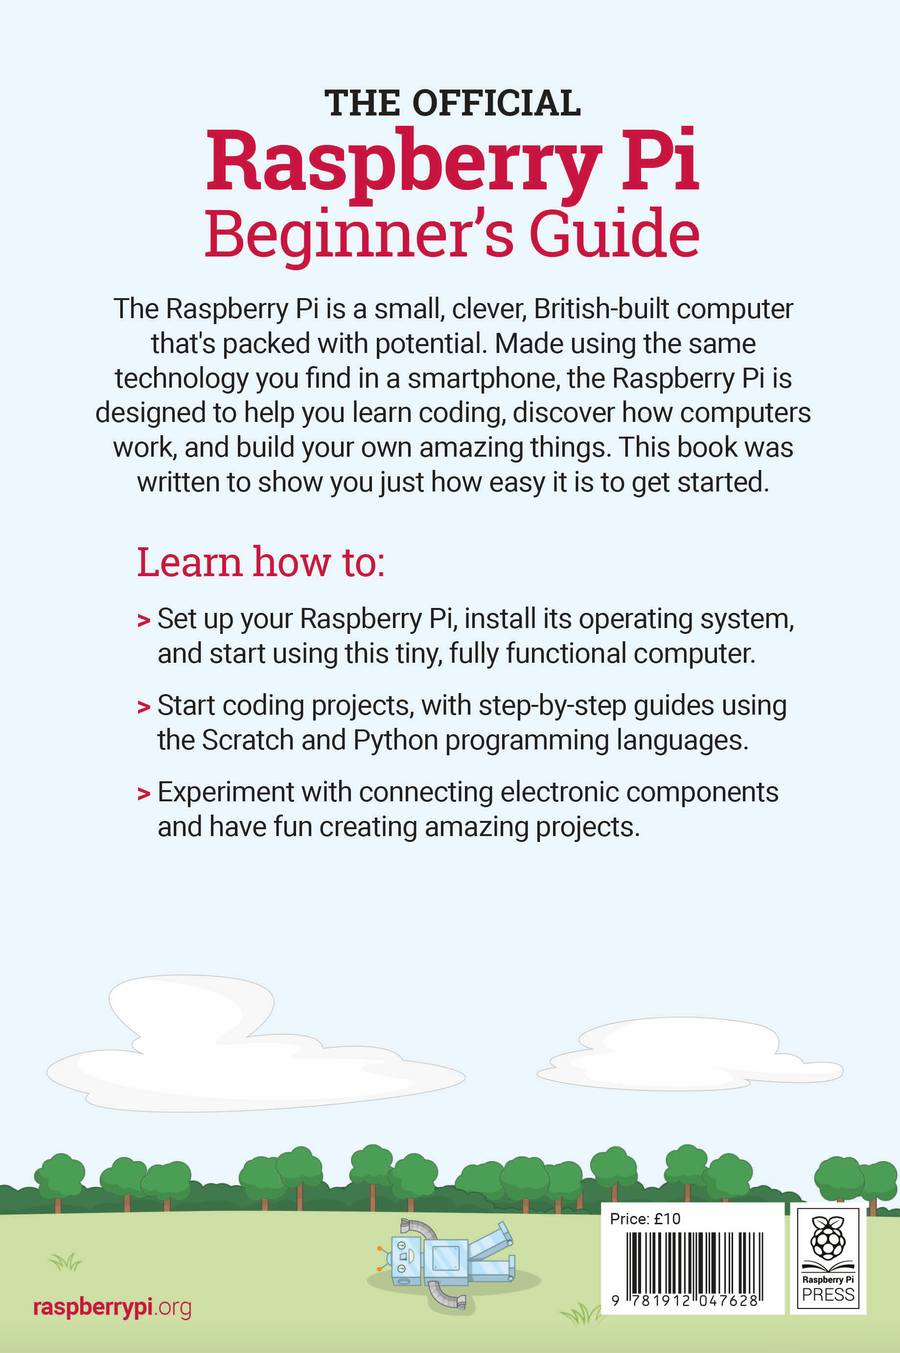 The Official Raspberry Pi Beginner’s Guide – 2nd Edition